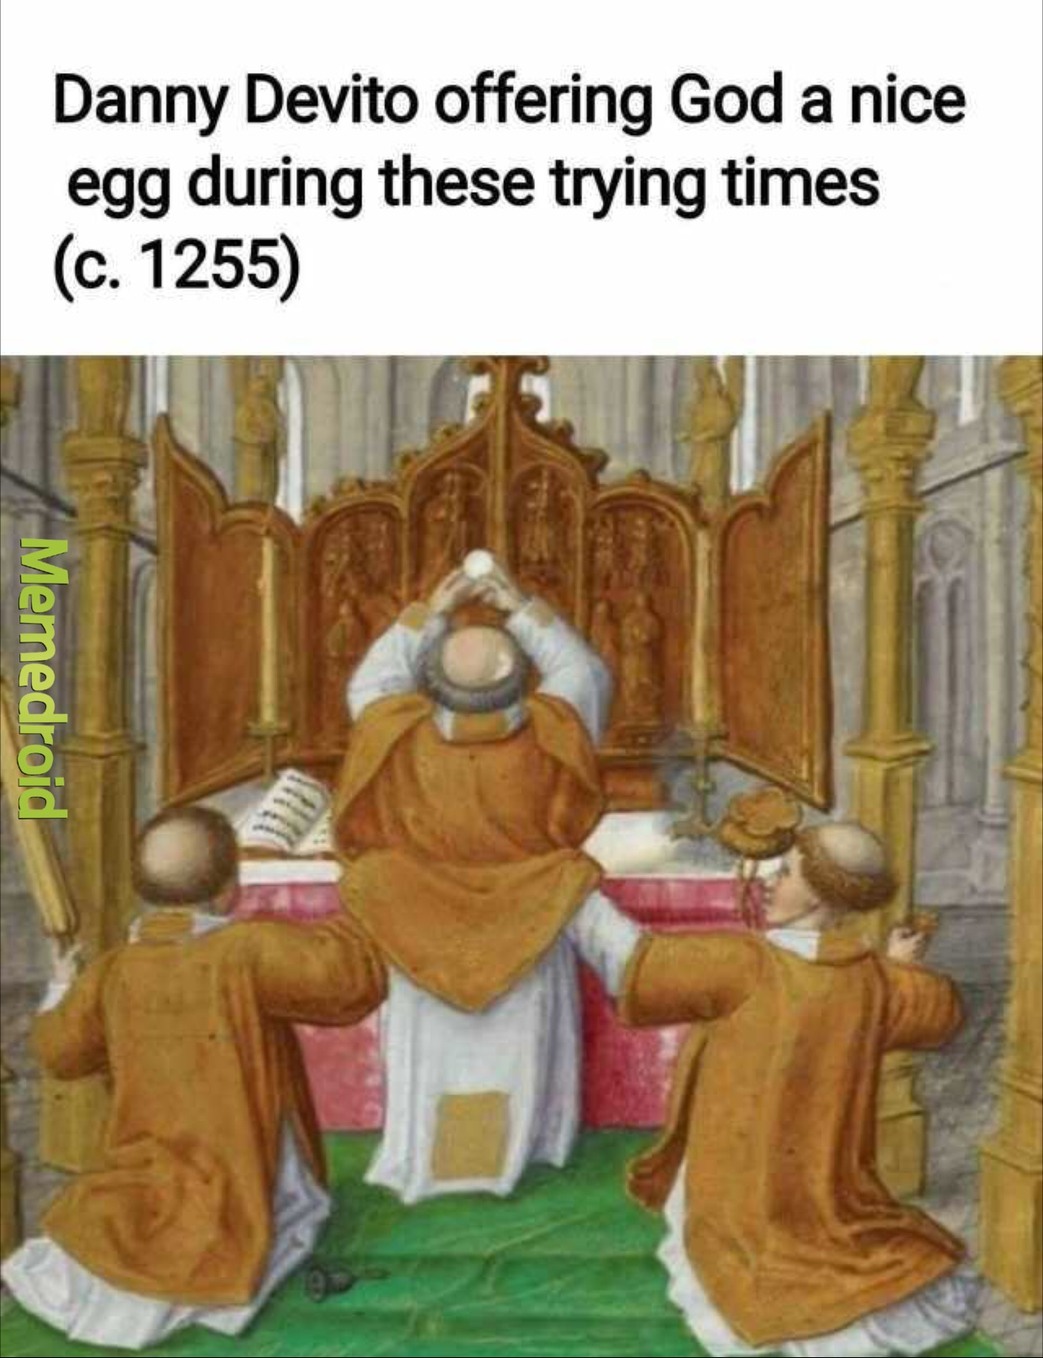 May I offer you a nice egg in this trying time? - meme